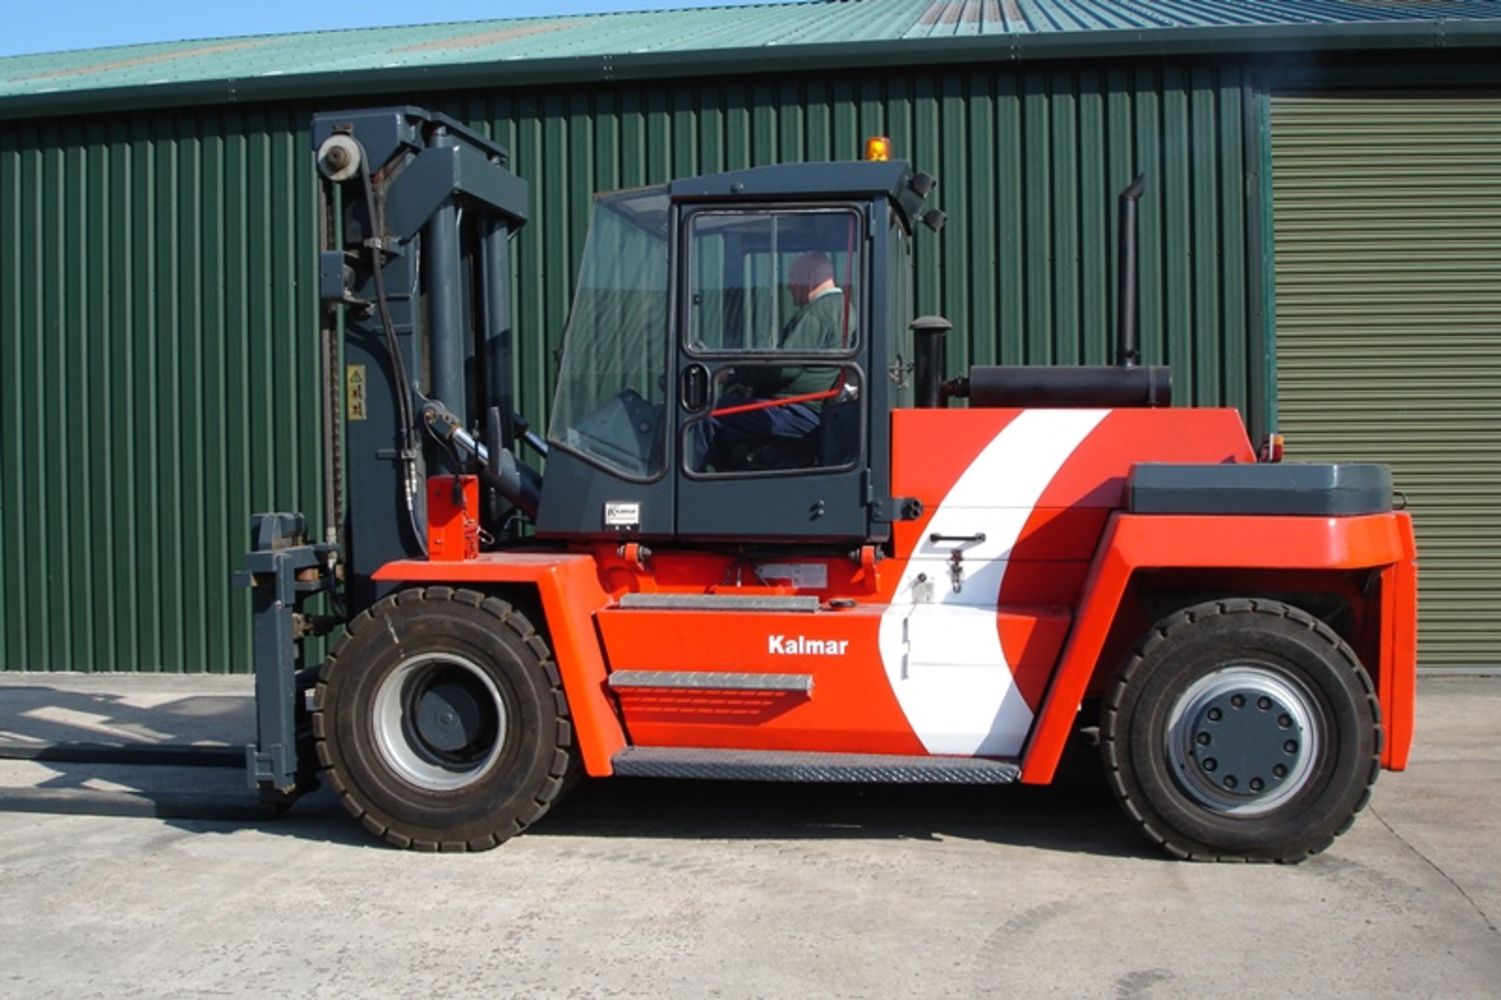 FORKLIFTS AND EQUIPMENT FROM A MACHINE MOVING COMPANY ,TOOLROOM & FABRICATION MACHINERY , WAREHOUSE EQUIPMENT